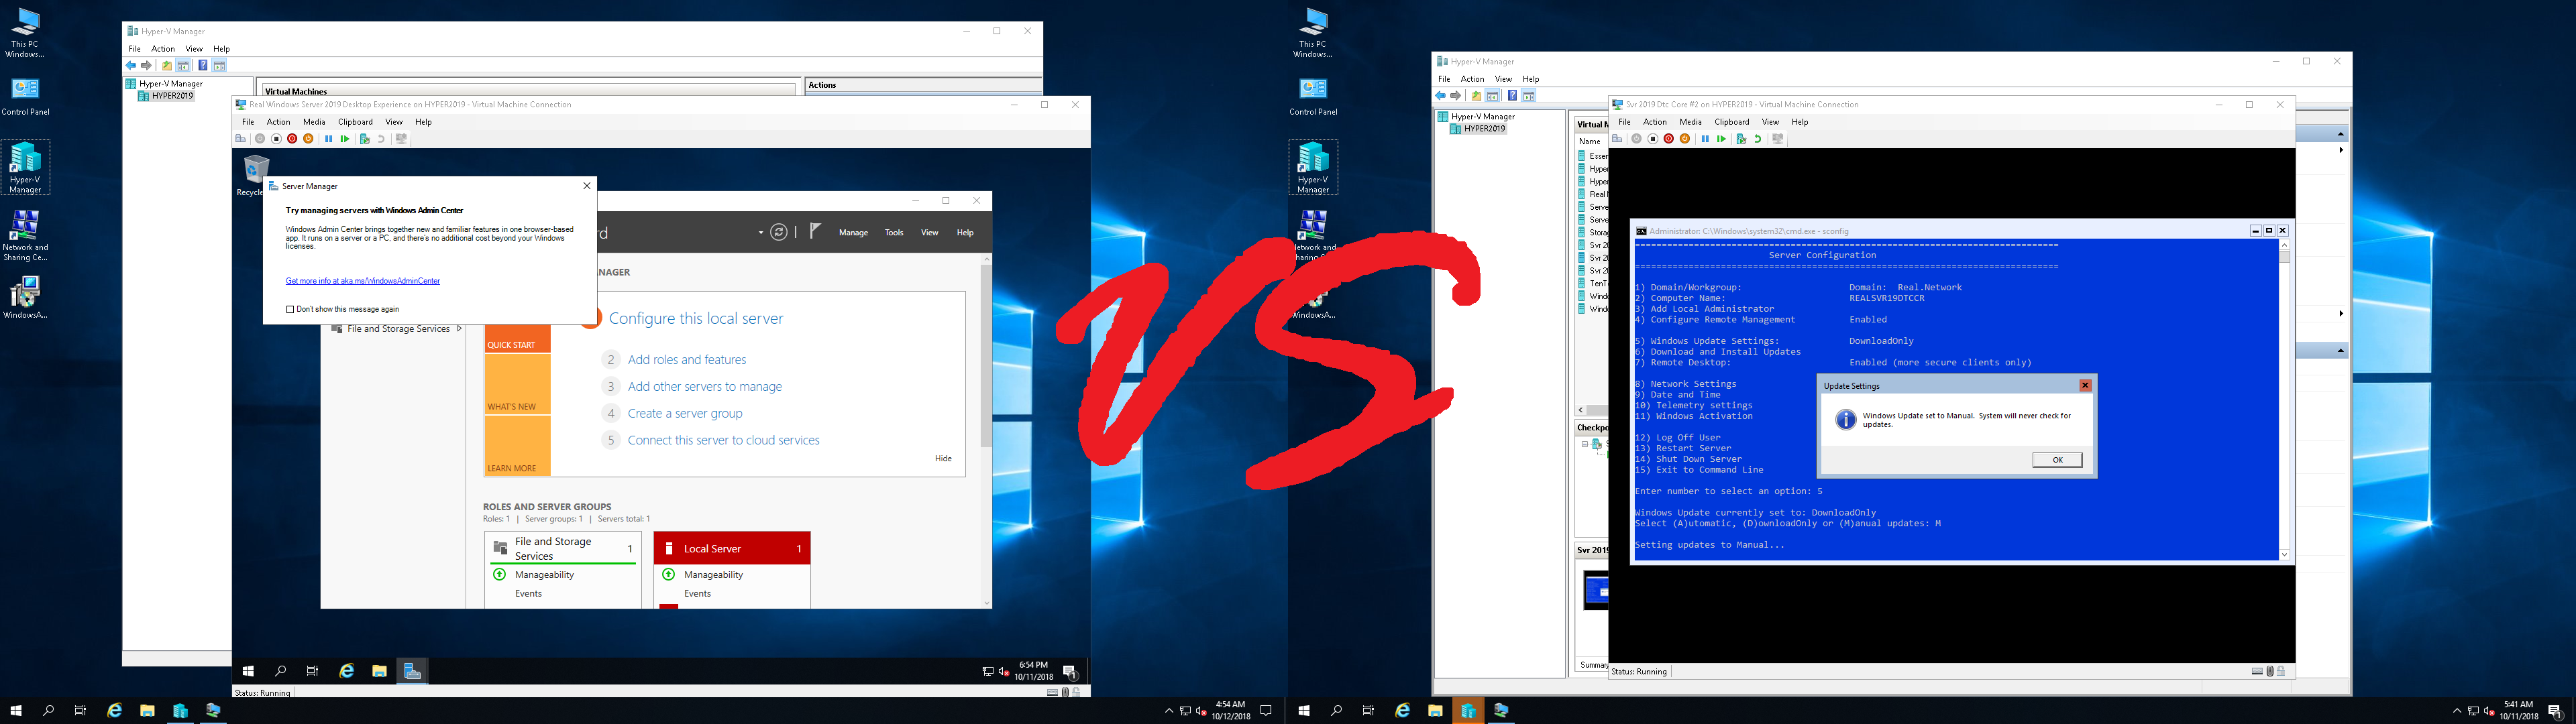 Adding Gui Based Capabilities To Windows Server Core Transformation To A Full Scale Gui Based Workstation For Windows Server Standard Datacenter Hyper V Minishell Sysinternals 5nine Winrar More By Real Network Labs